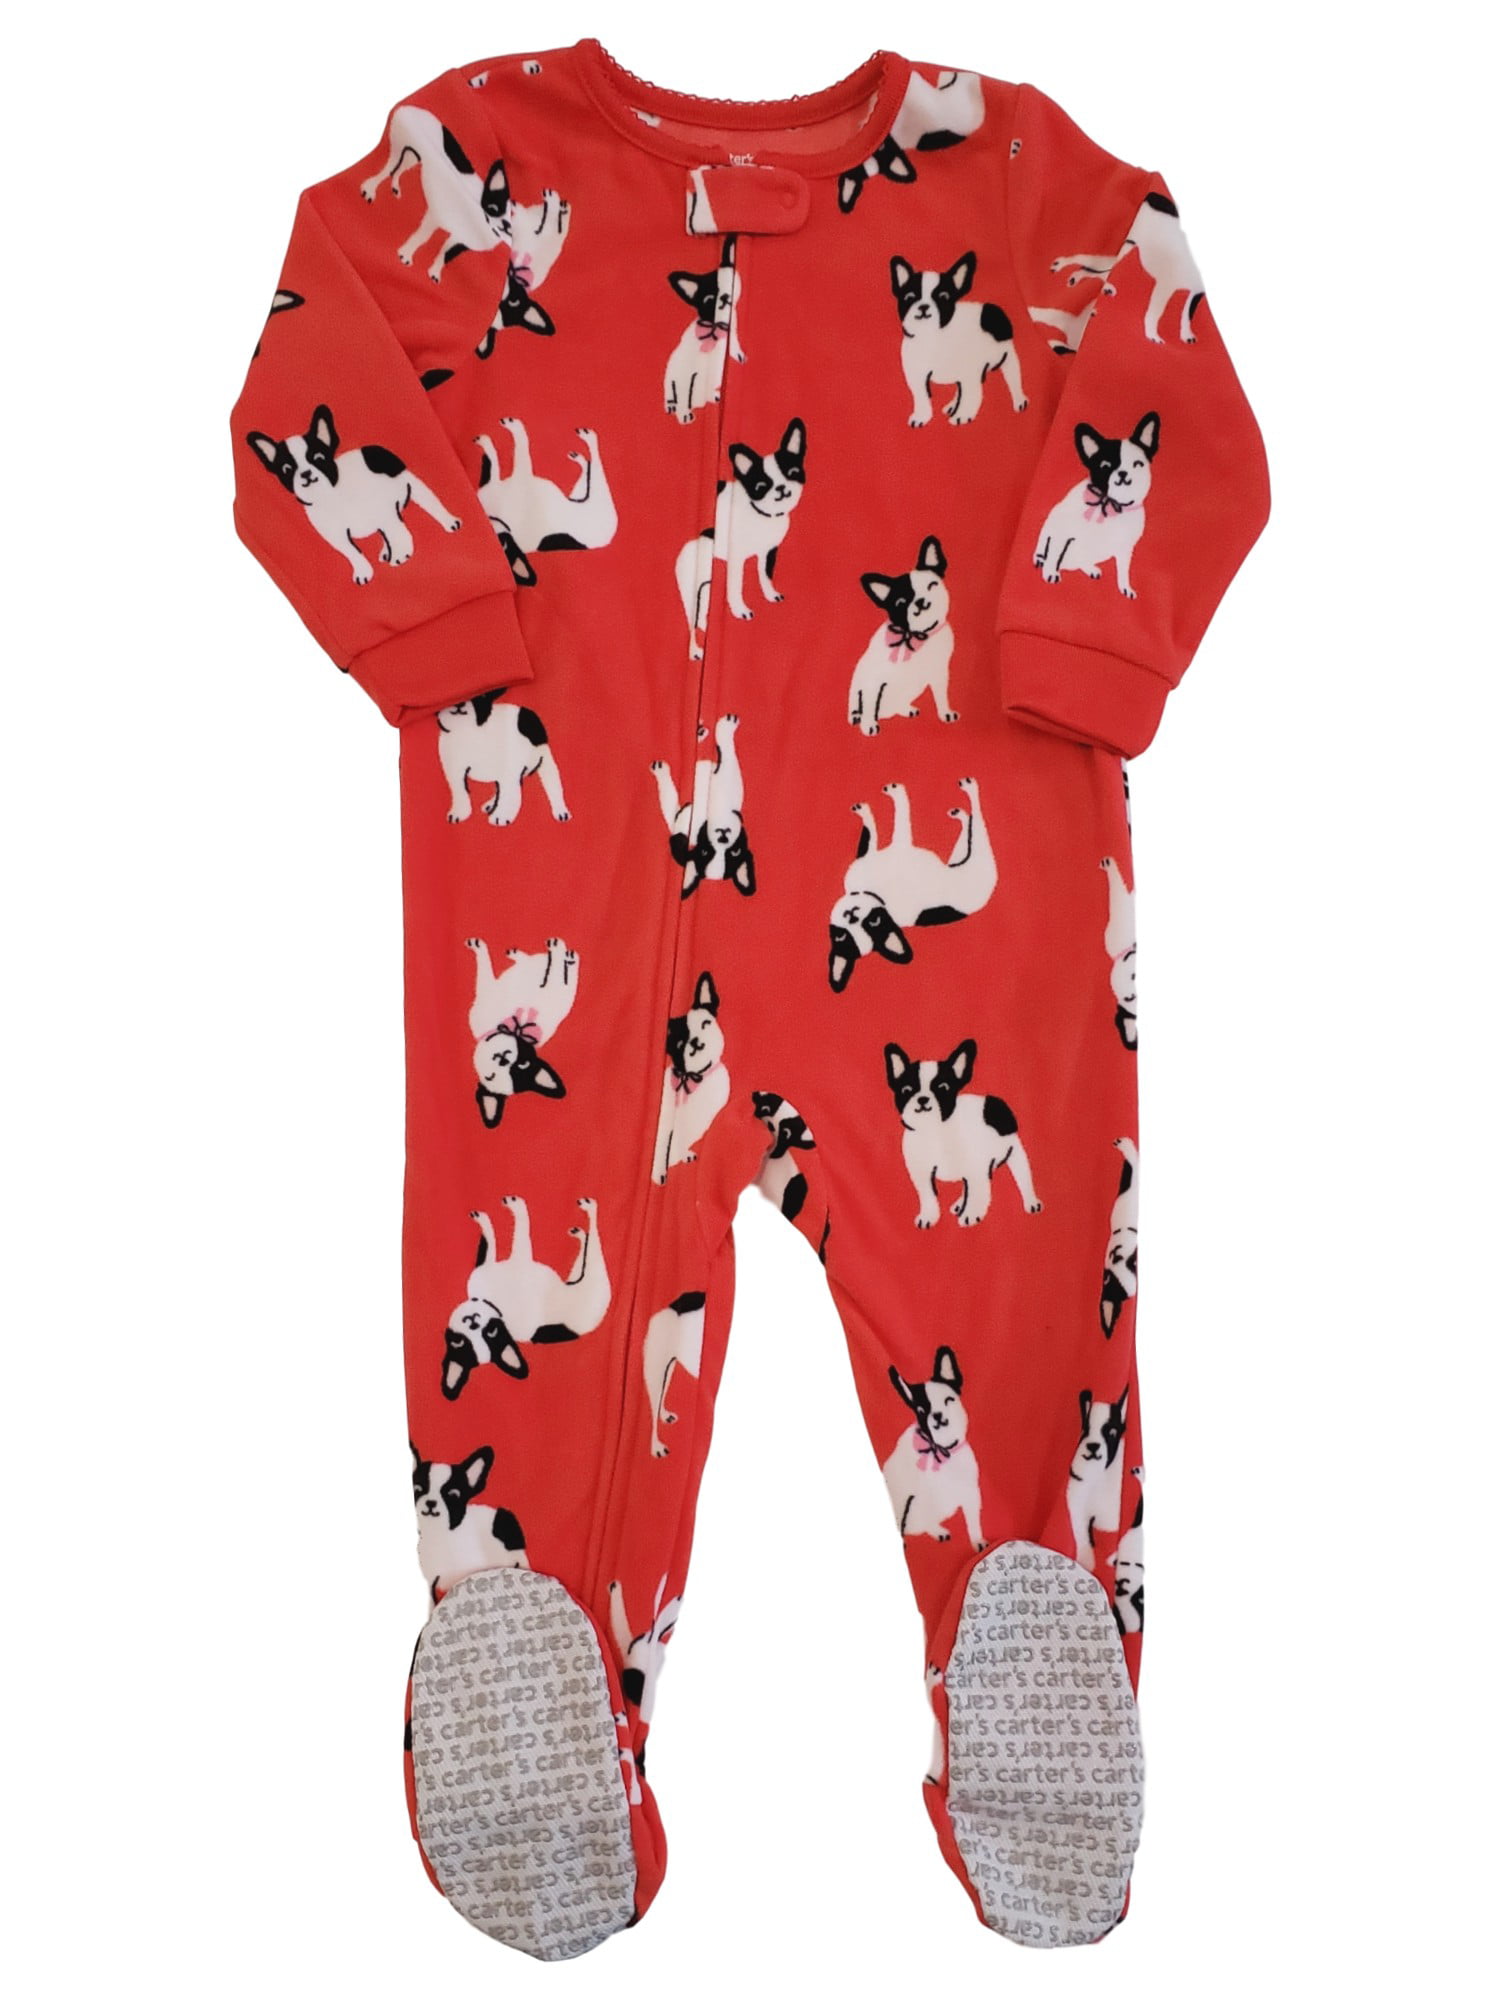 NEW Infant Toddler Girl Boy Joe Boxer 2 Pack Footed Pajamas 18M 2T 3T 4T 